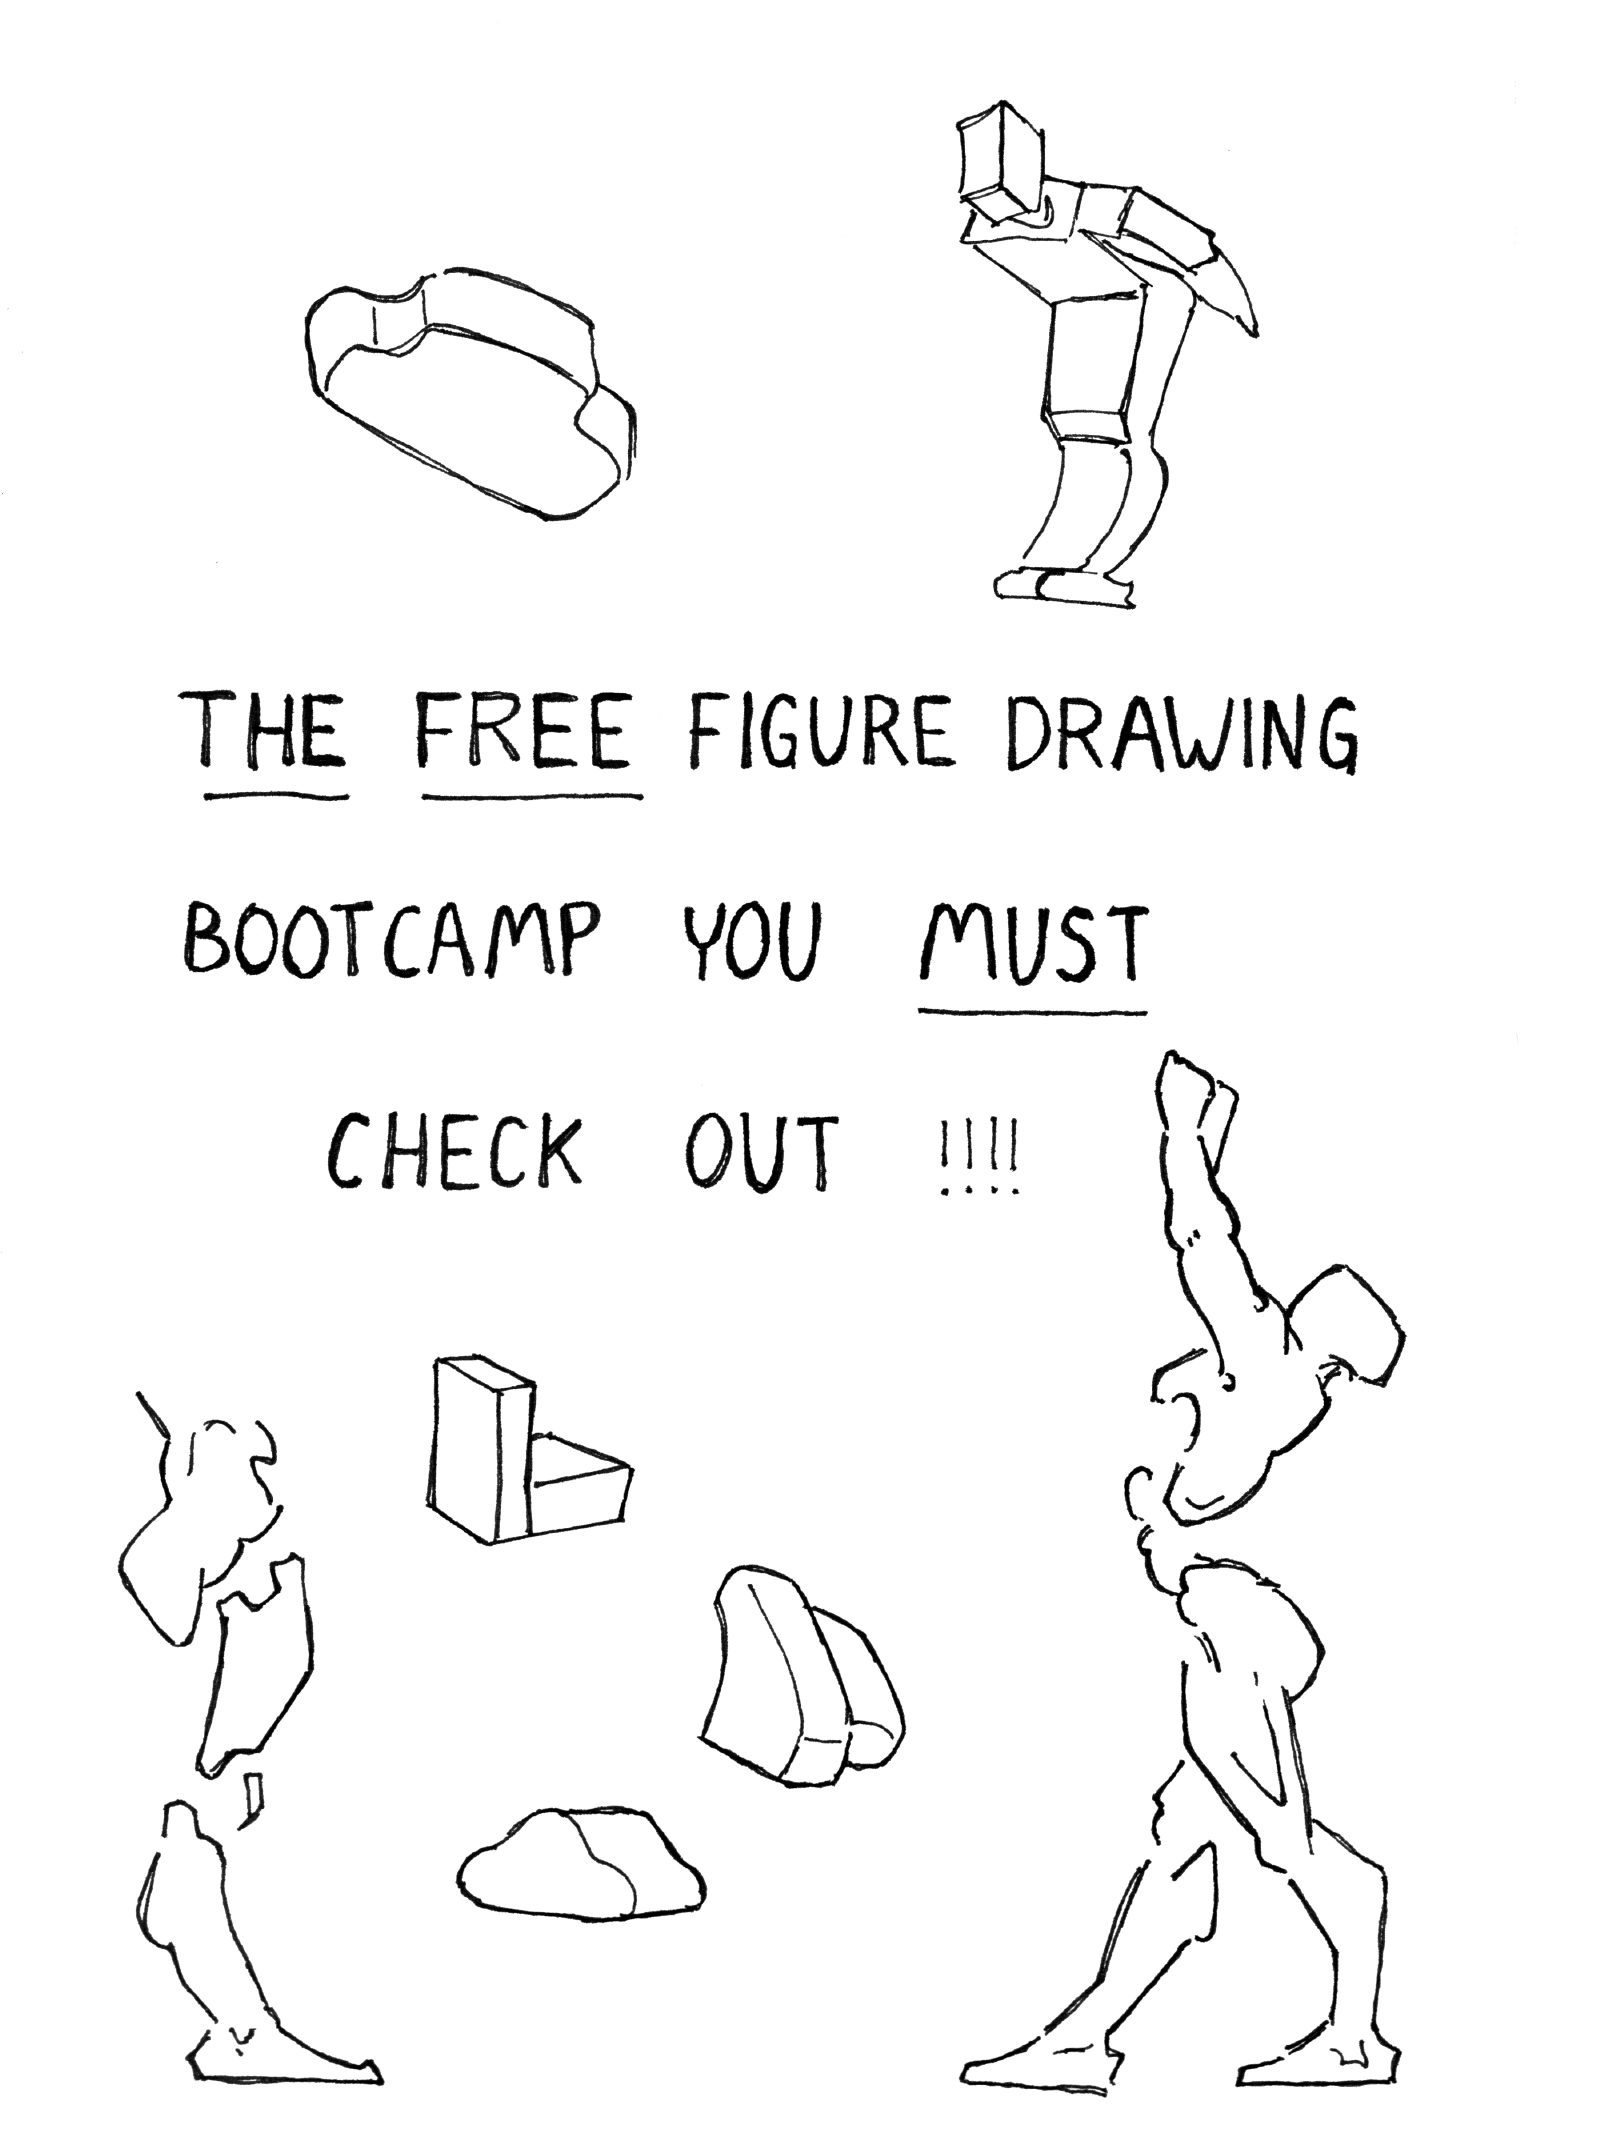 The Free Figure Drawing Bootcamp You MUST Check out!